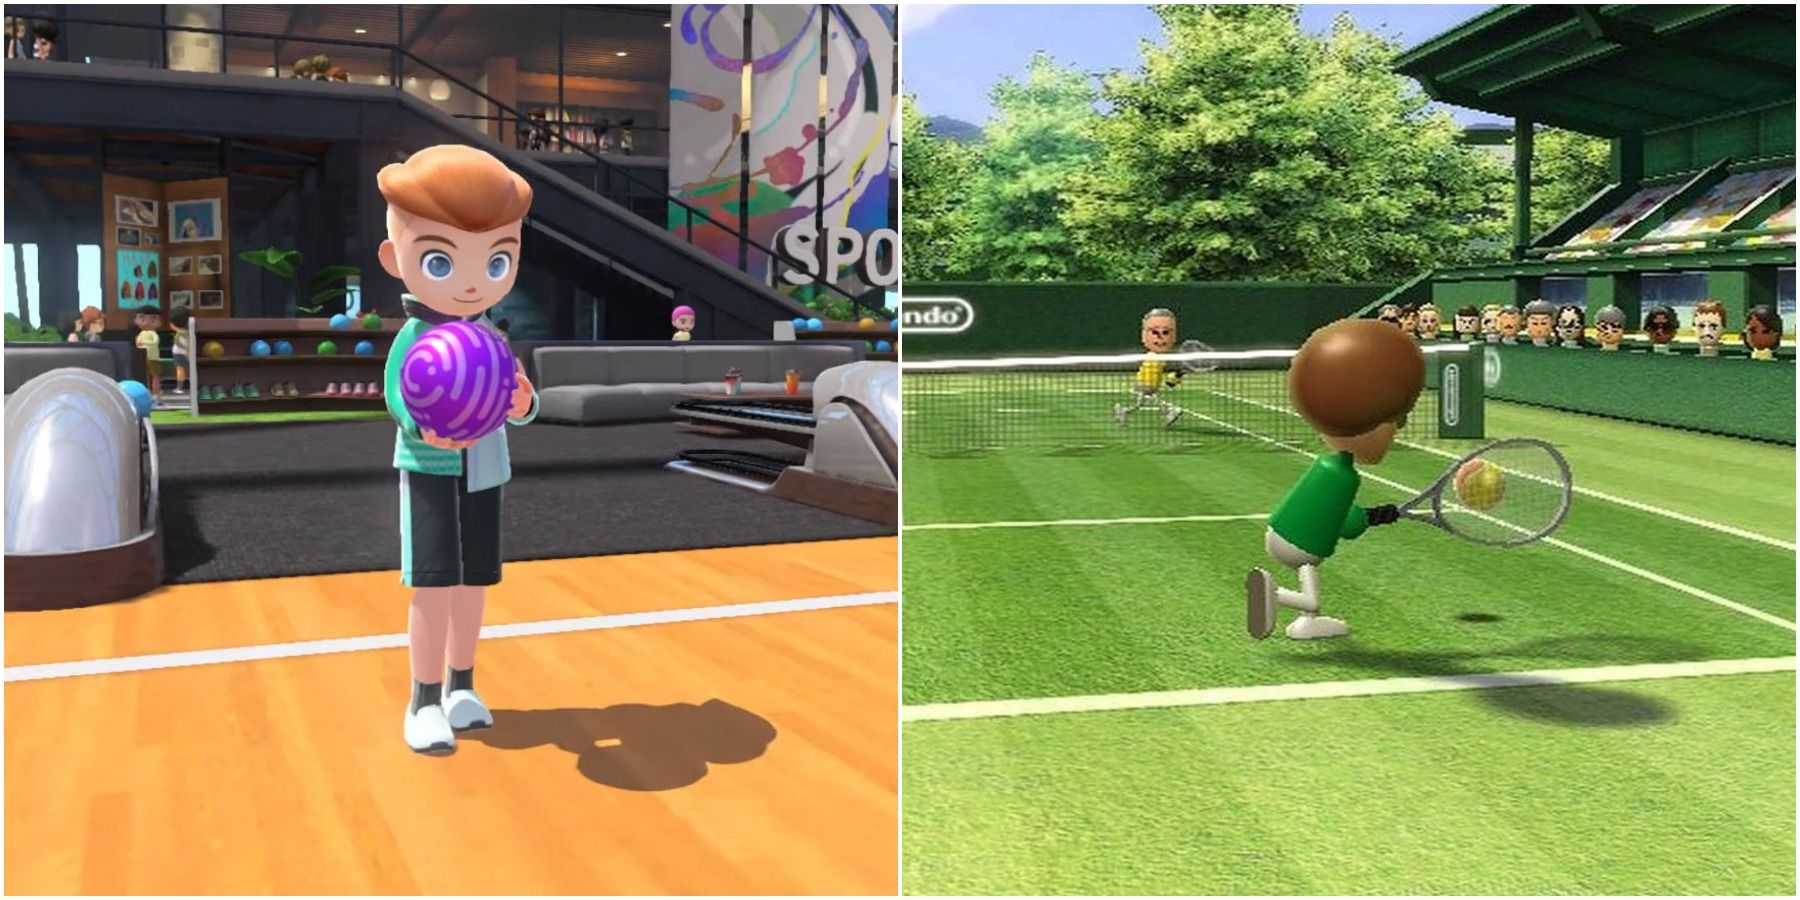 Spectaculair pianist Gezondheid Things Nintendo Switch Sports Does Better Than Wii Sports